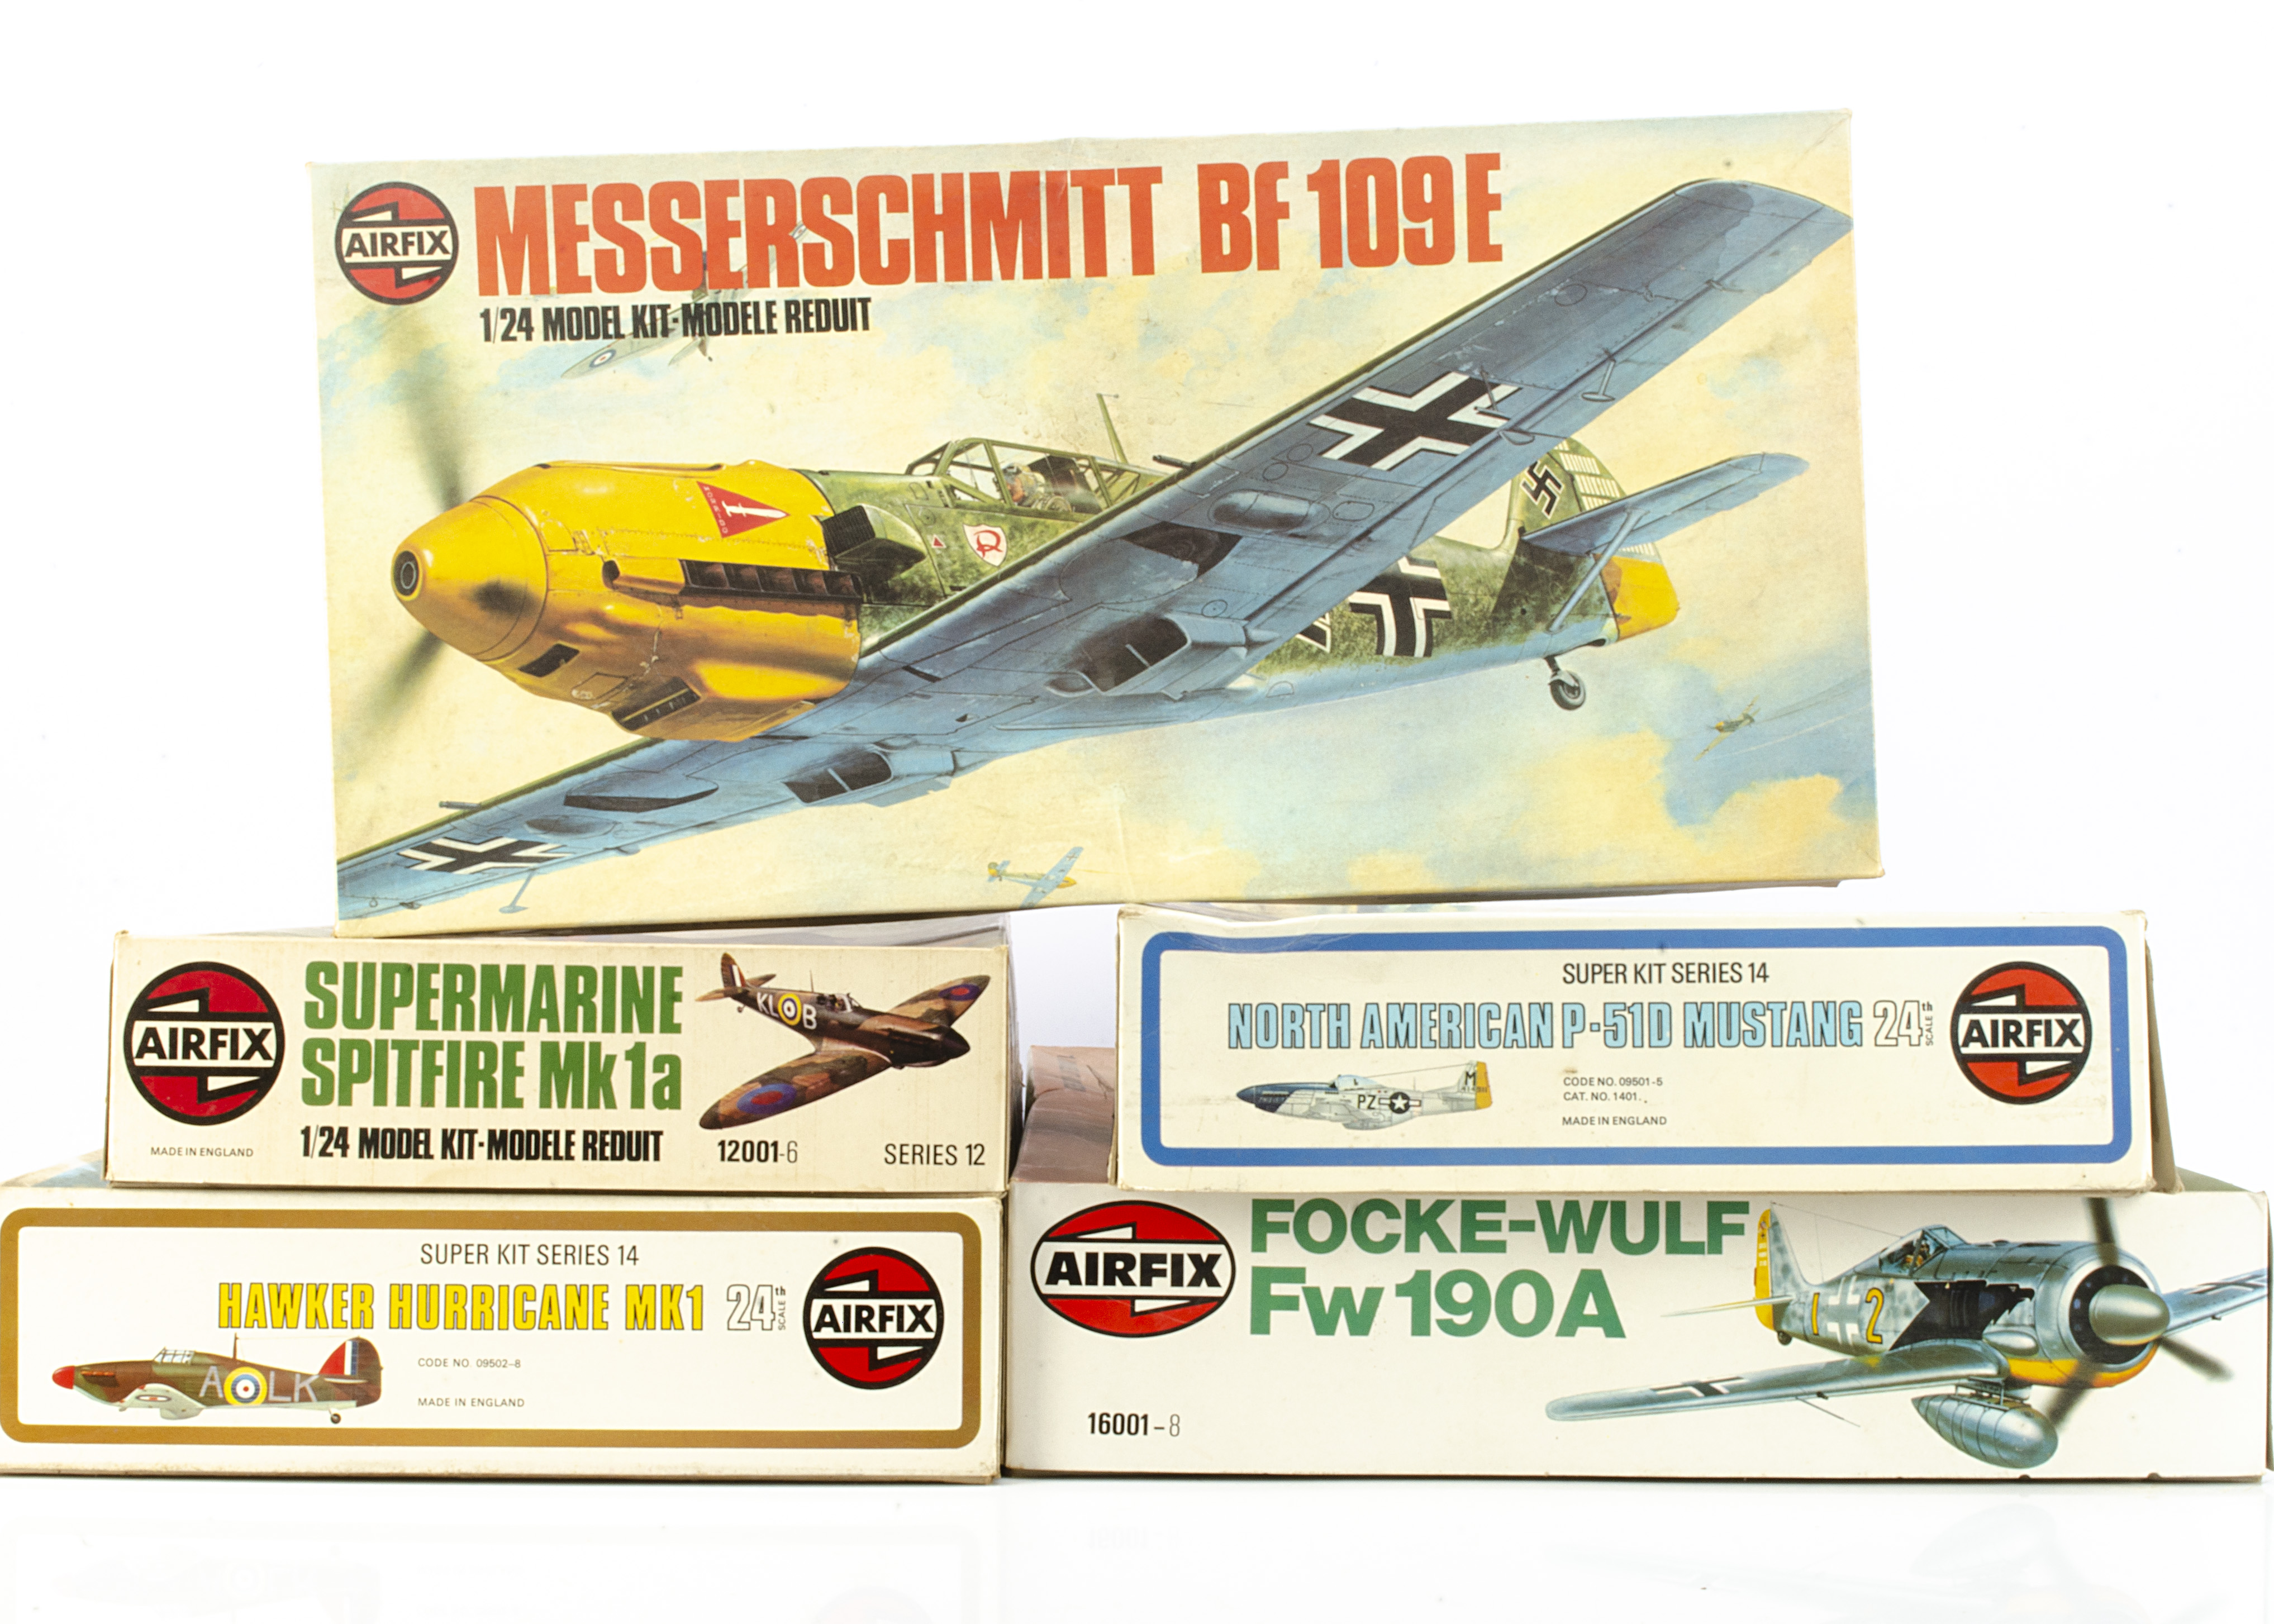 1970s-80s Airfix 1:24 WWII Aircraft Kits, 09502-8, 16001-8, 09501-5, 12001-6, 12002-9, all appear